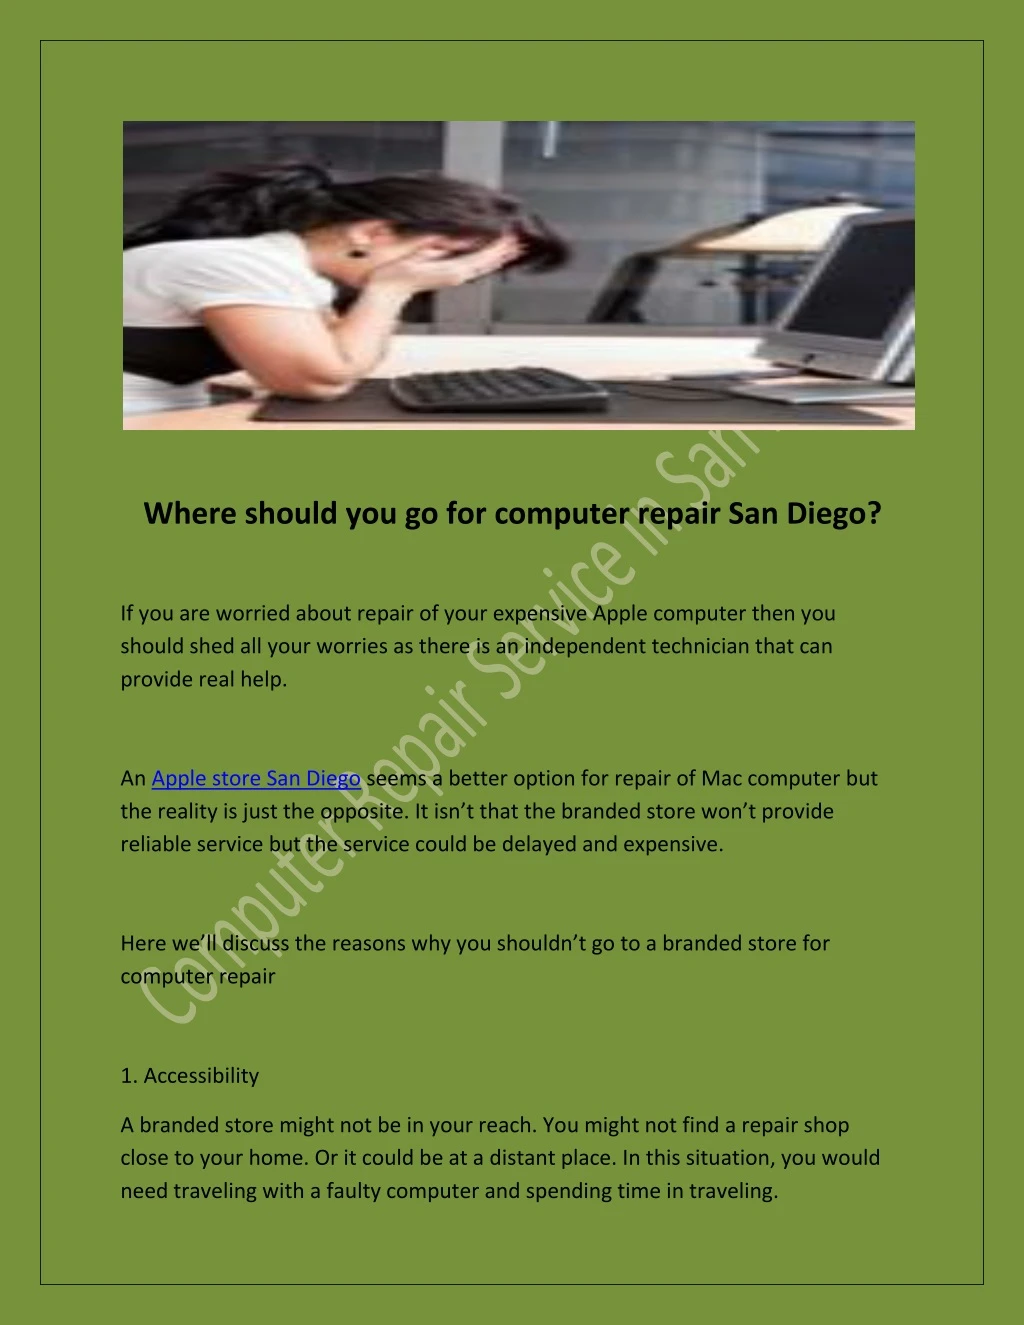 where should you go for computer repair san diego